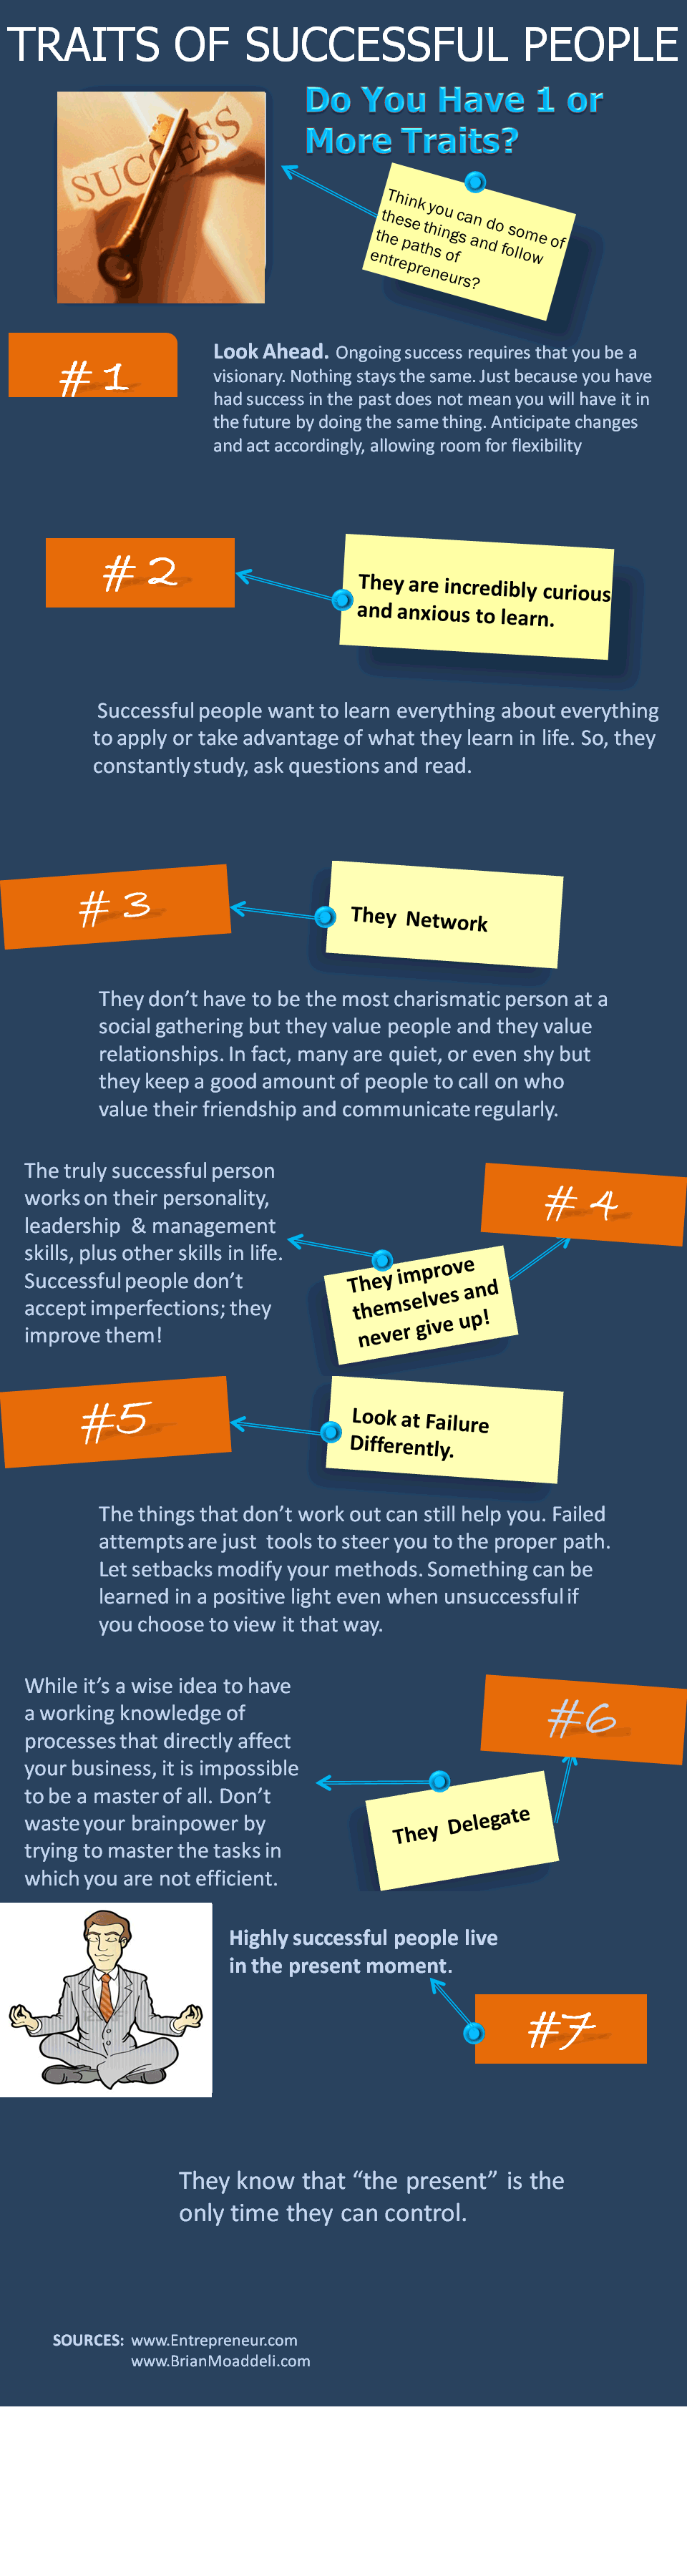 Traits of Successful People